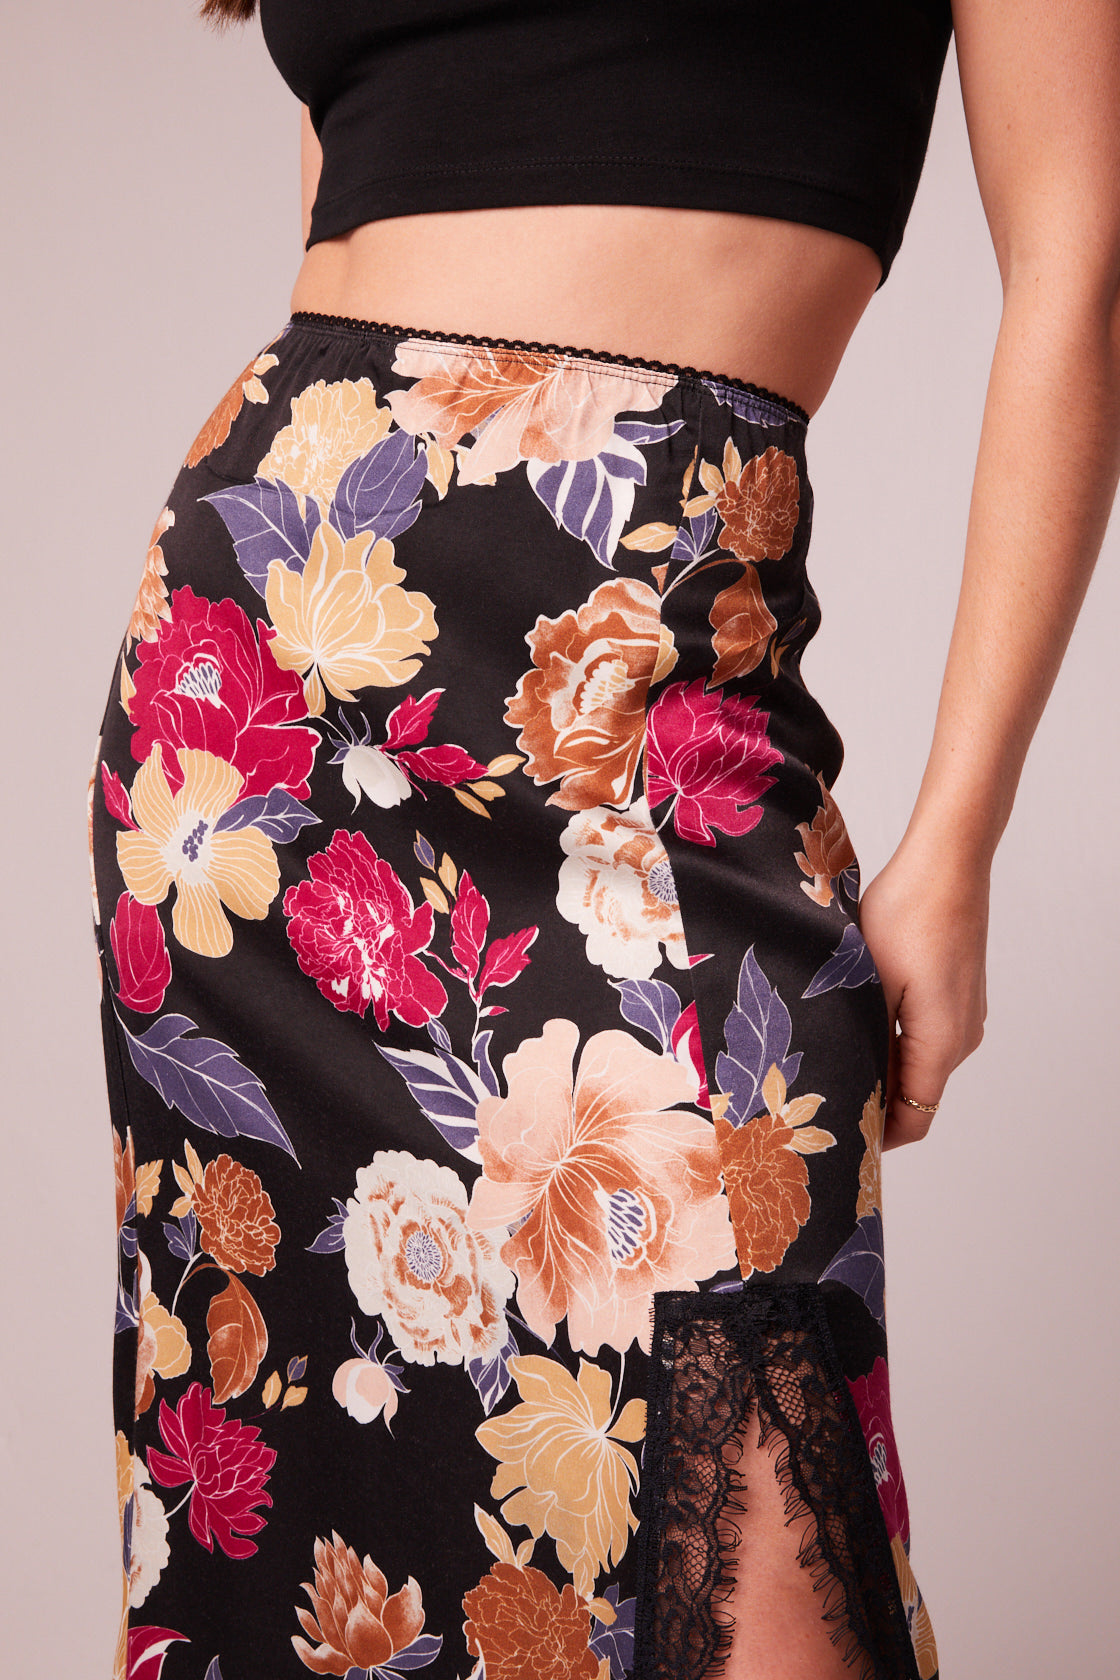 Lilou Black Floral Lace Slip - Skirt of the band free Midi